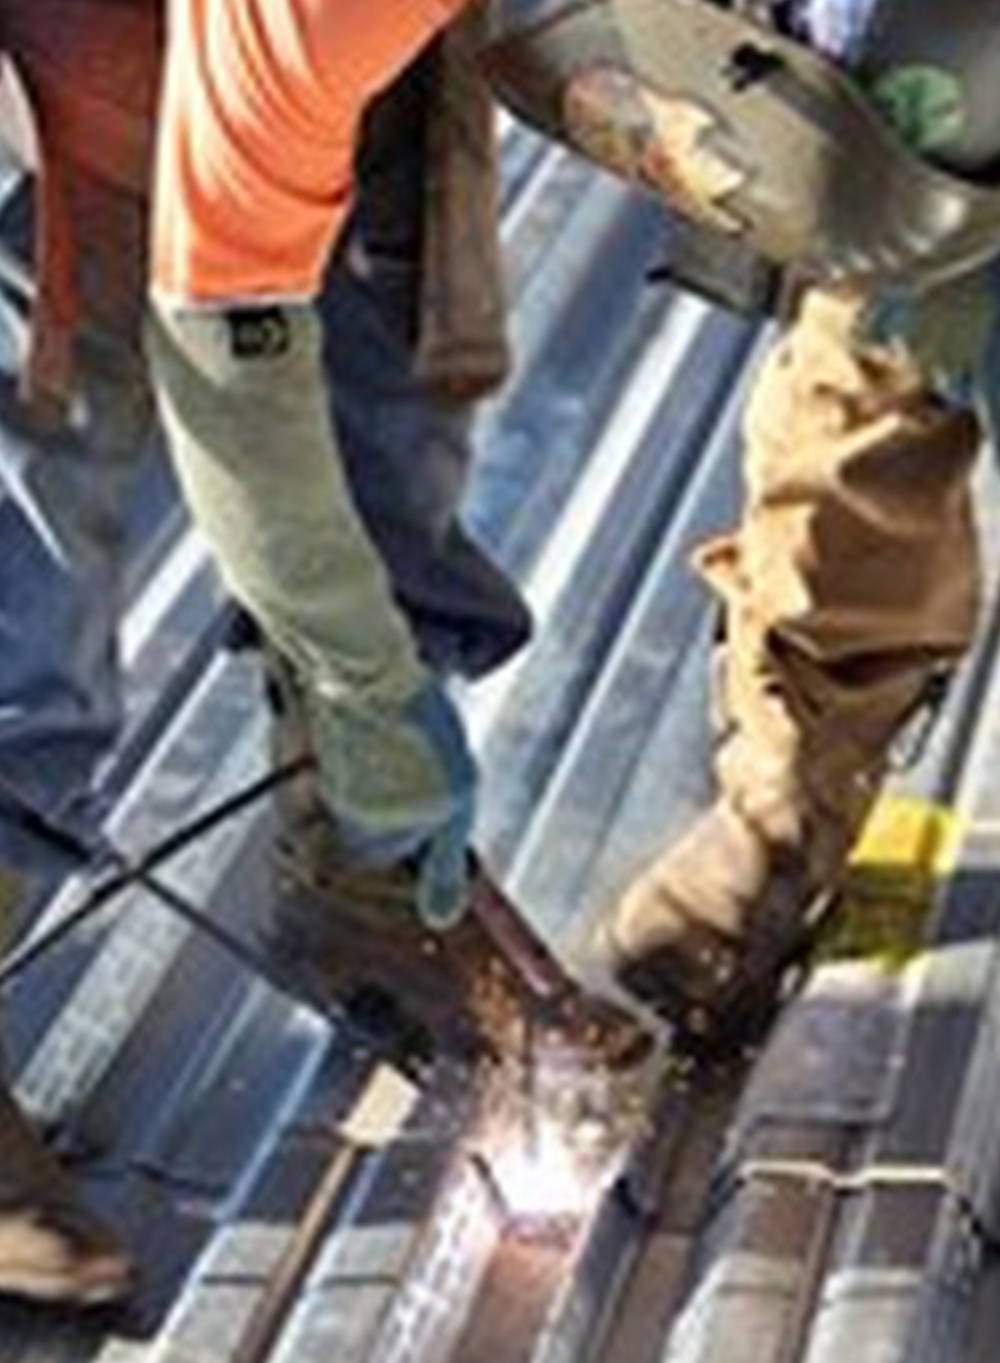 Construction worker wearing kevlar cut resistant sleeves and gloves while cutting sheet metal.